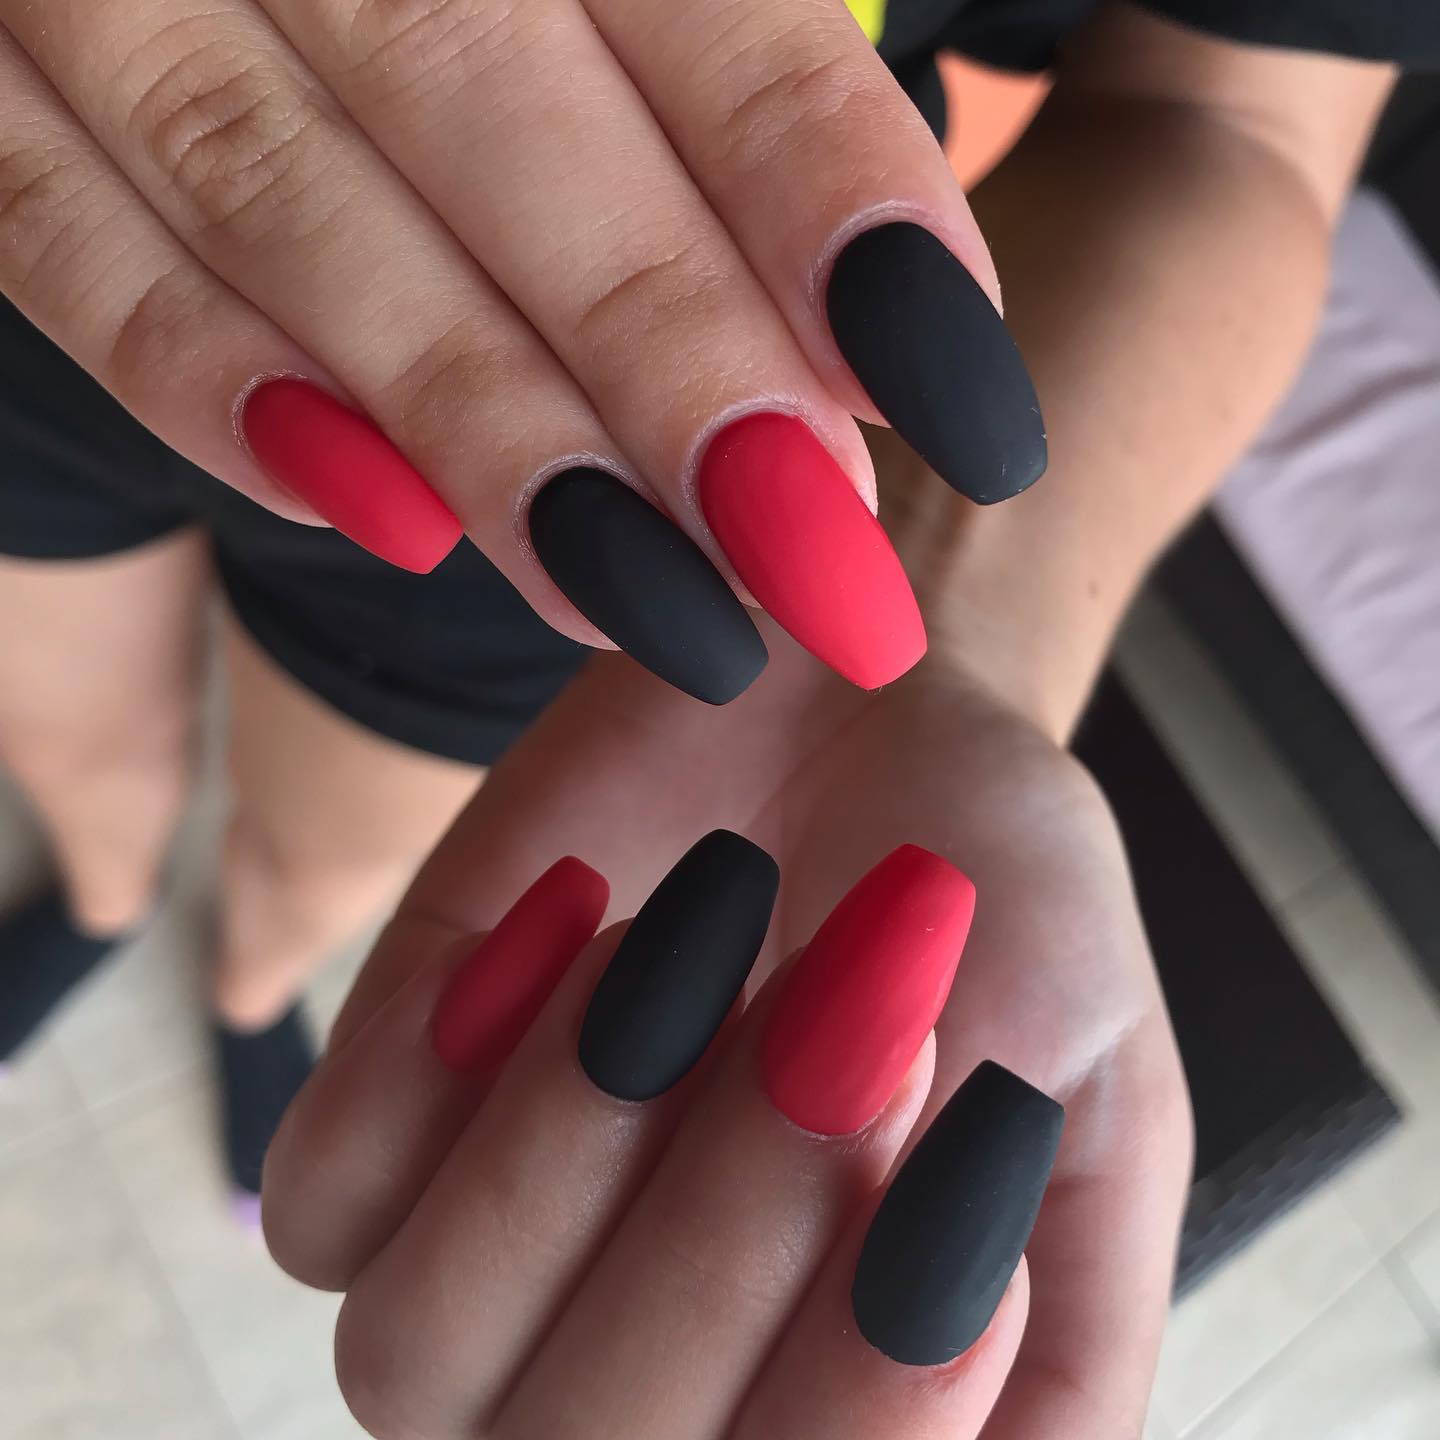 Even though glossy nail polishes are always a favourite choice, cool matte designs will never go out the style. Half red and half black matte nails look super classy and you do not need any other decoration.